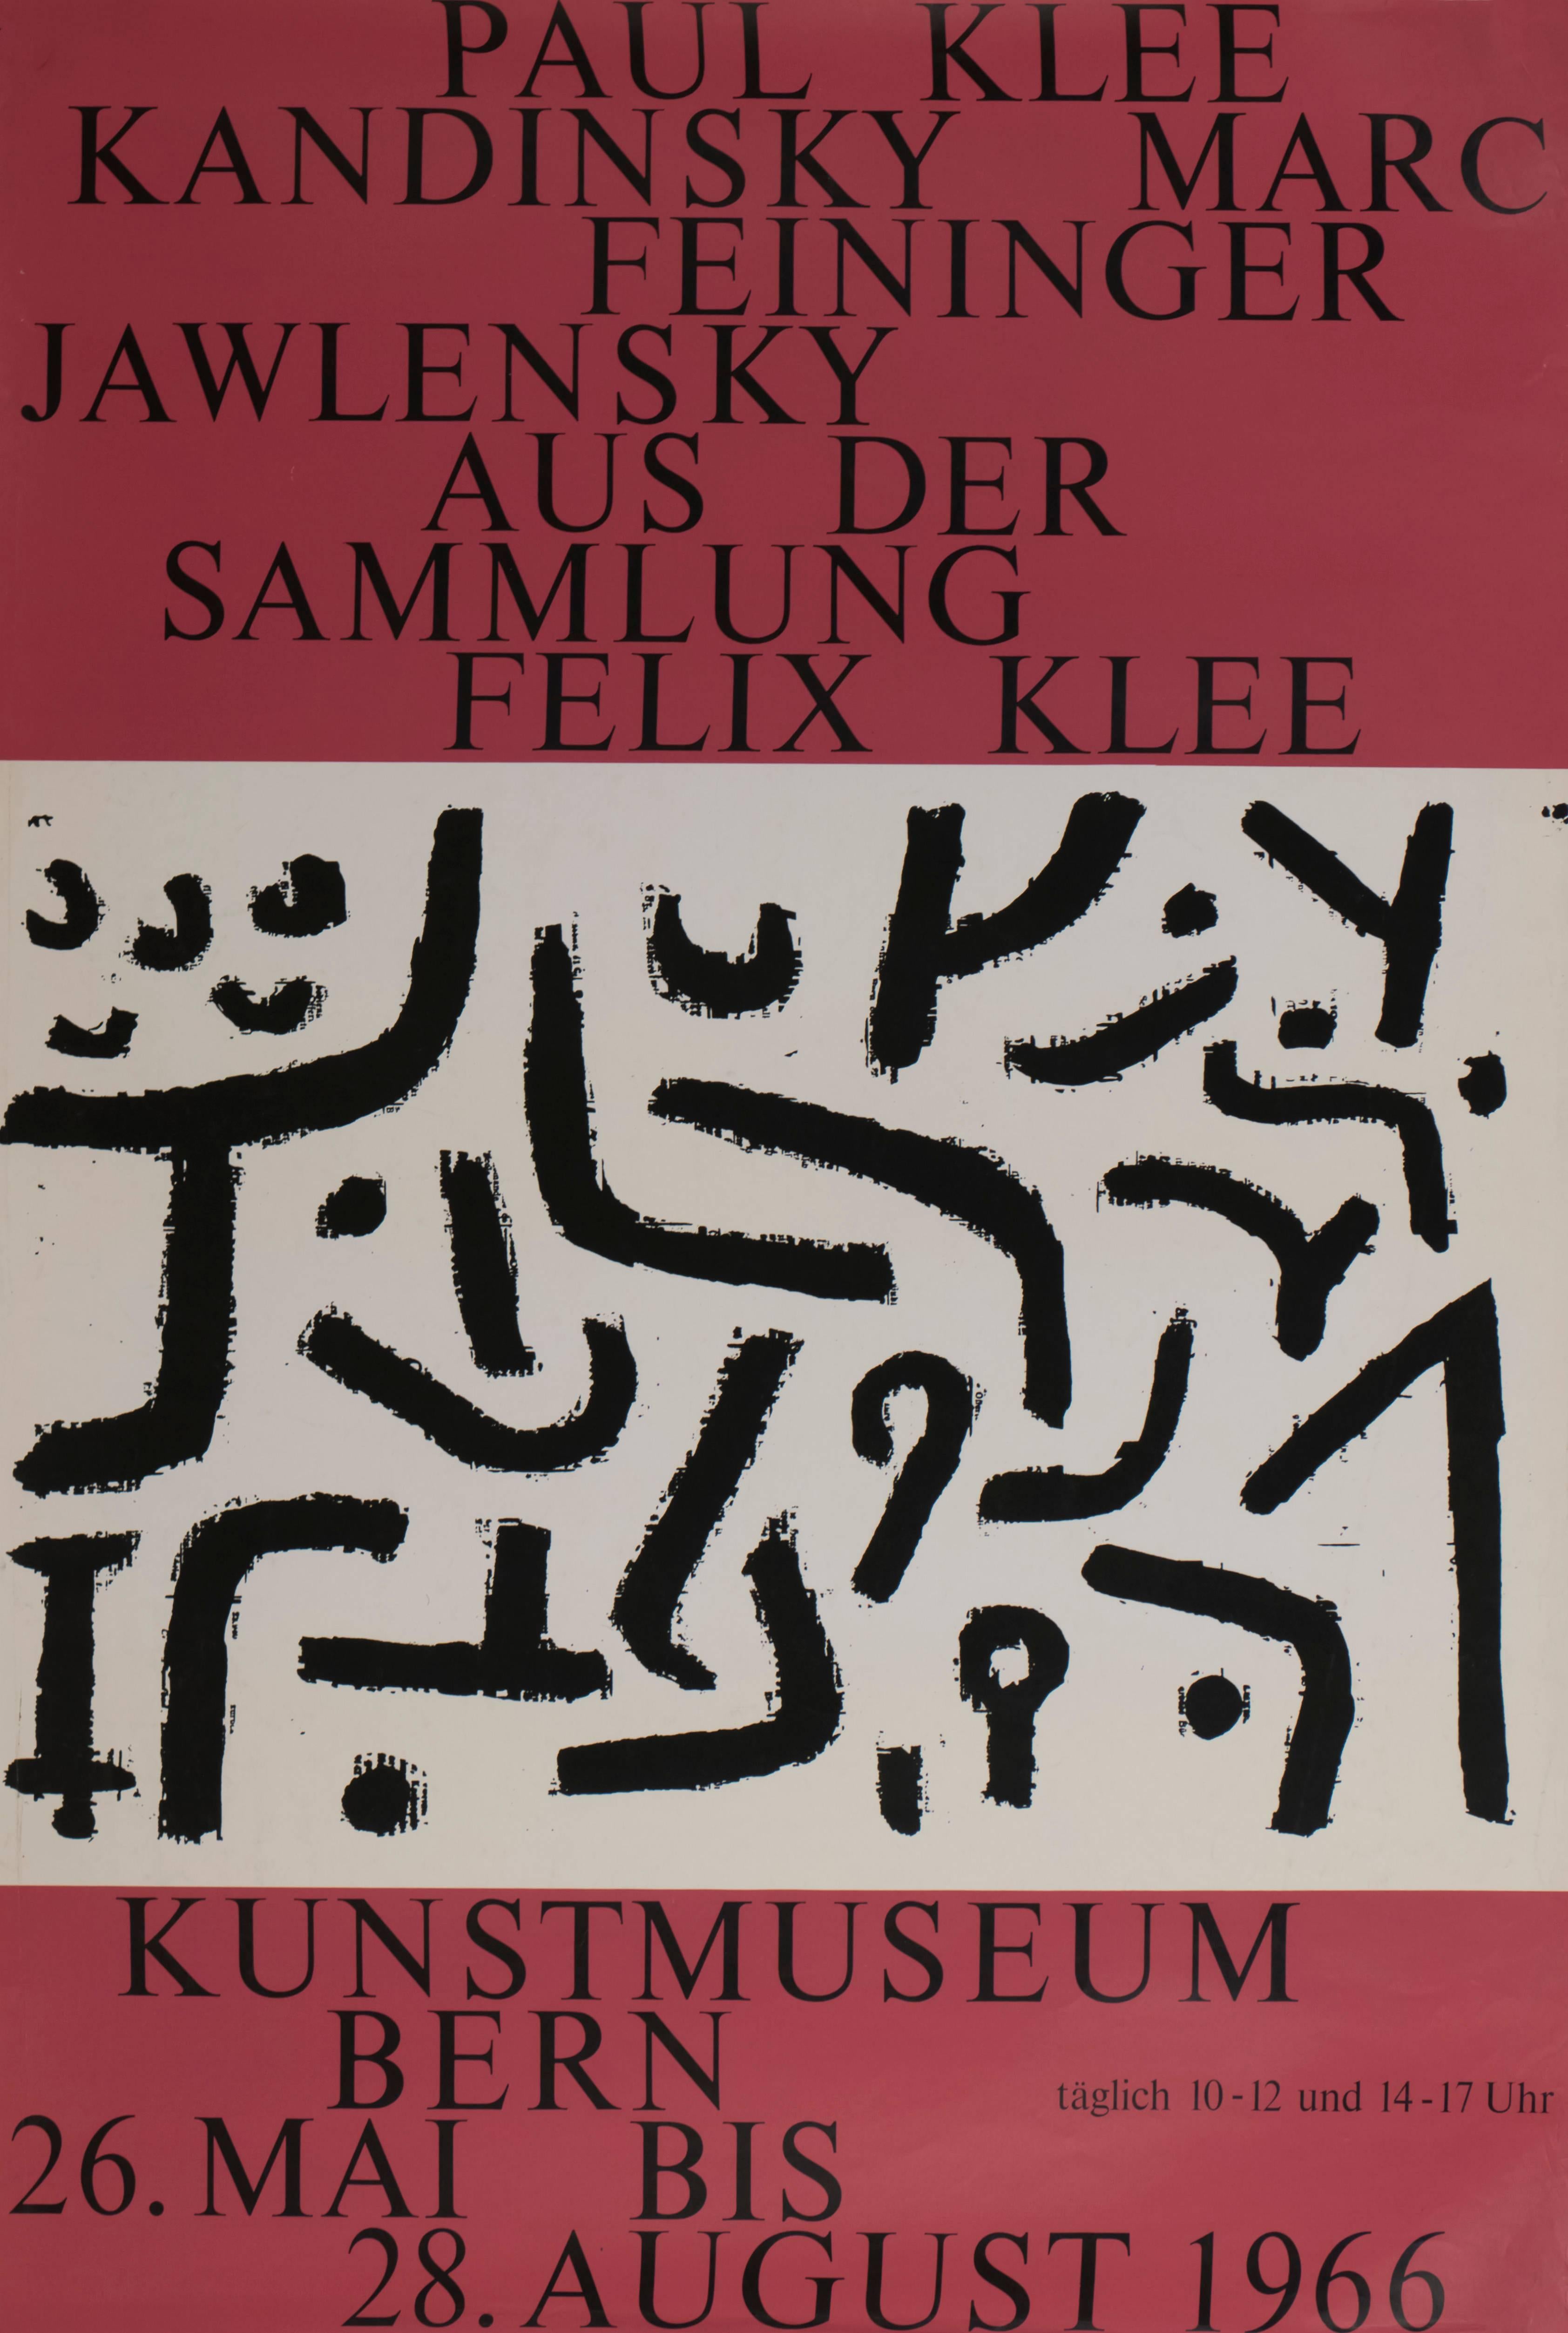 Paul Klee Abstract Print - Bern Museum Exhibition Poster